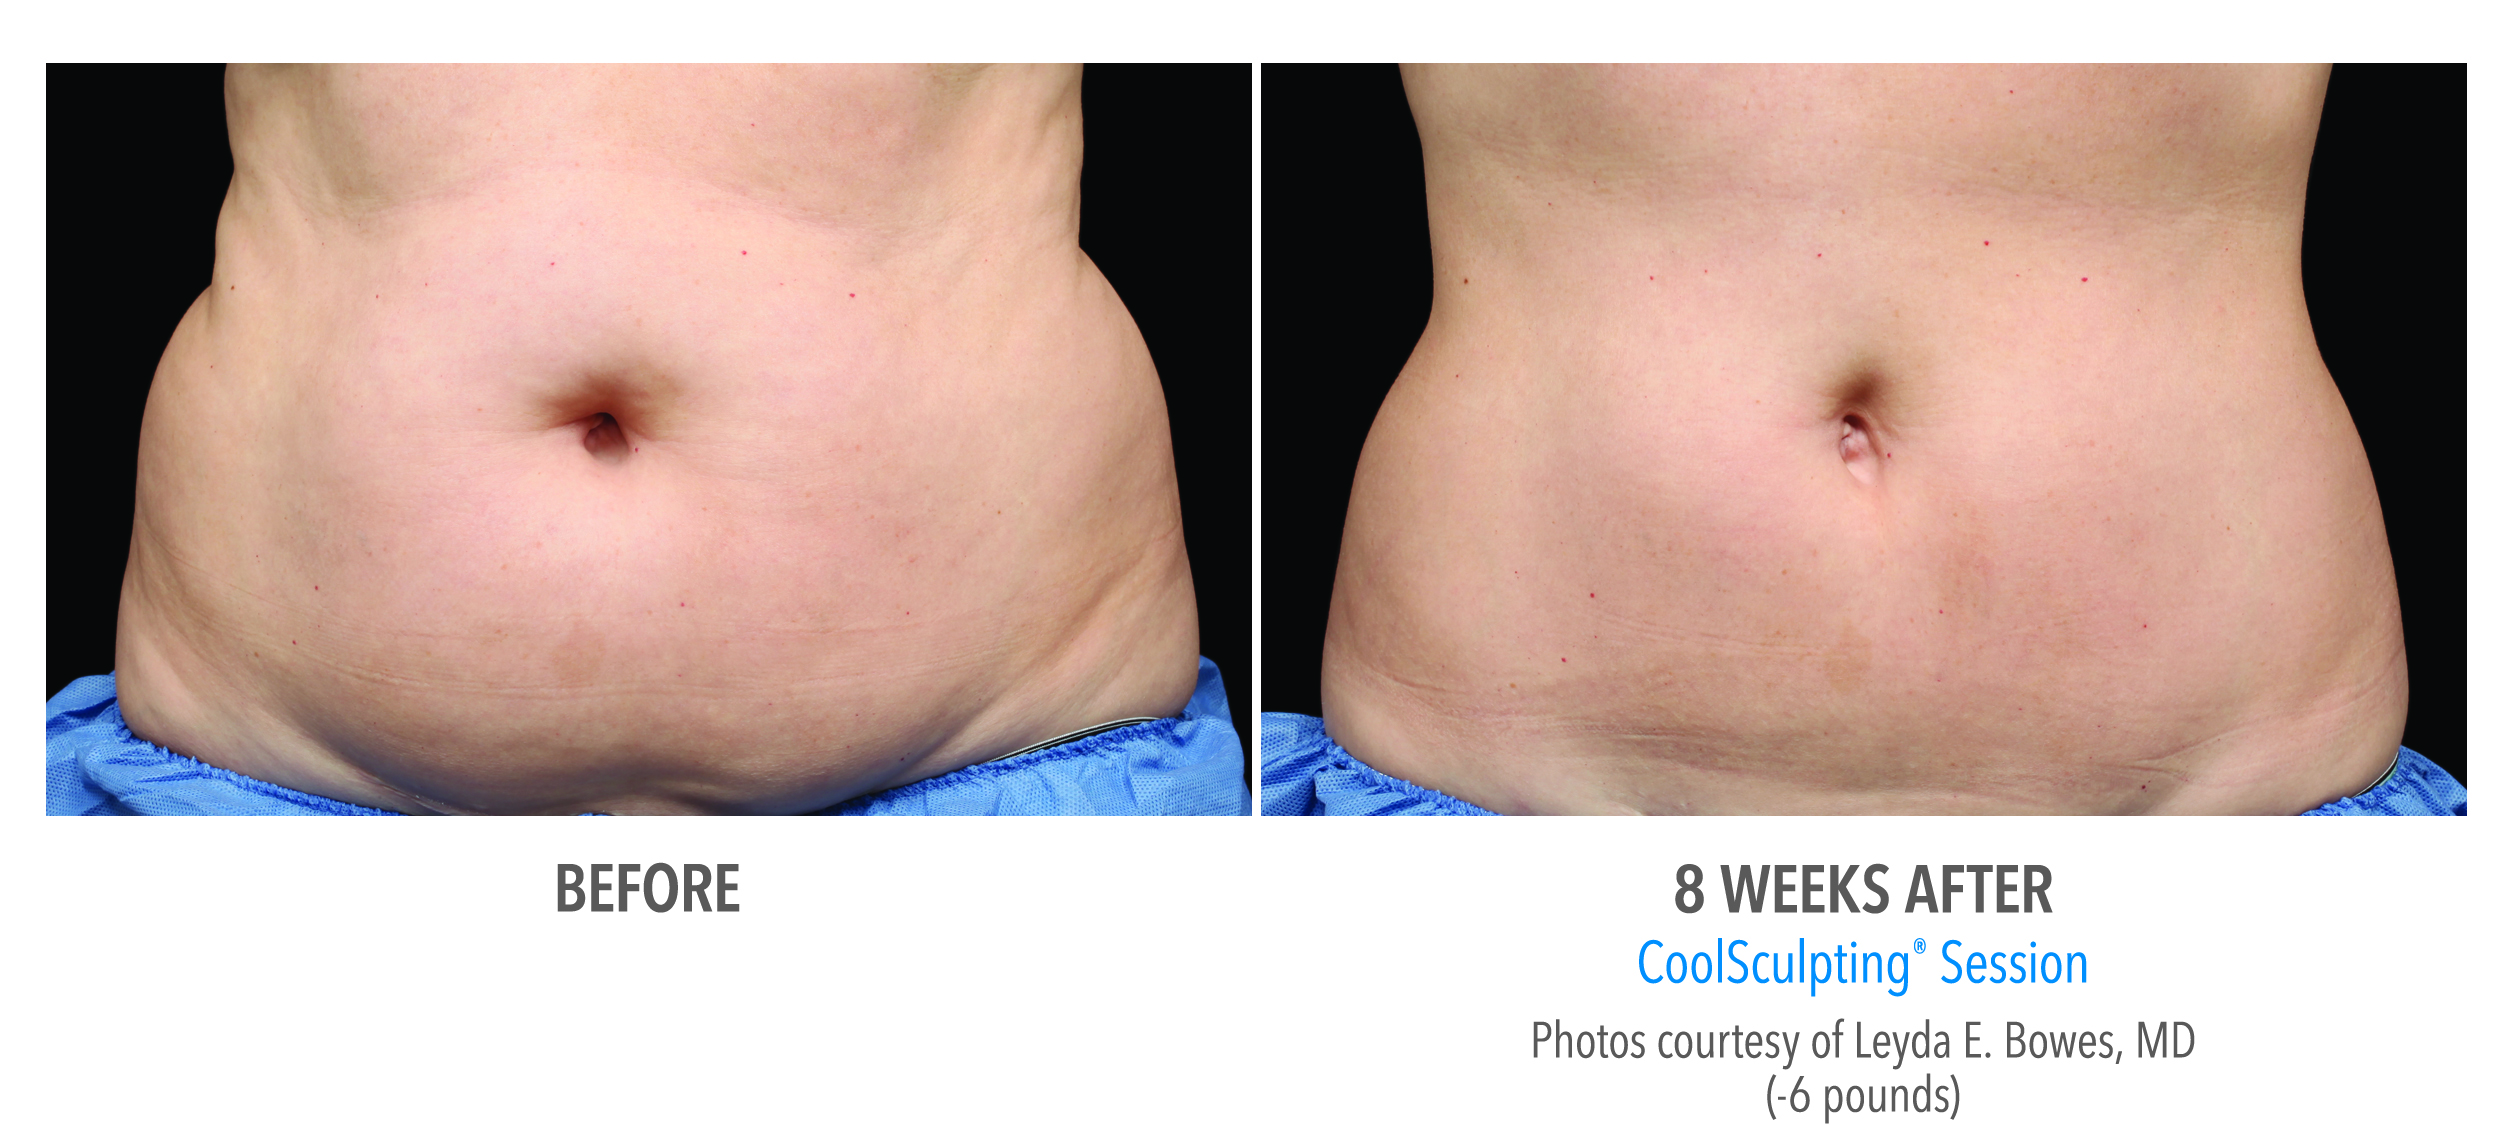 CoolSculpting Fat Reduction In Gainesville FL